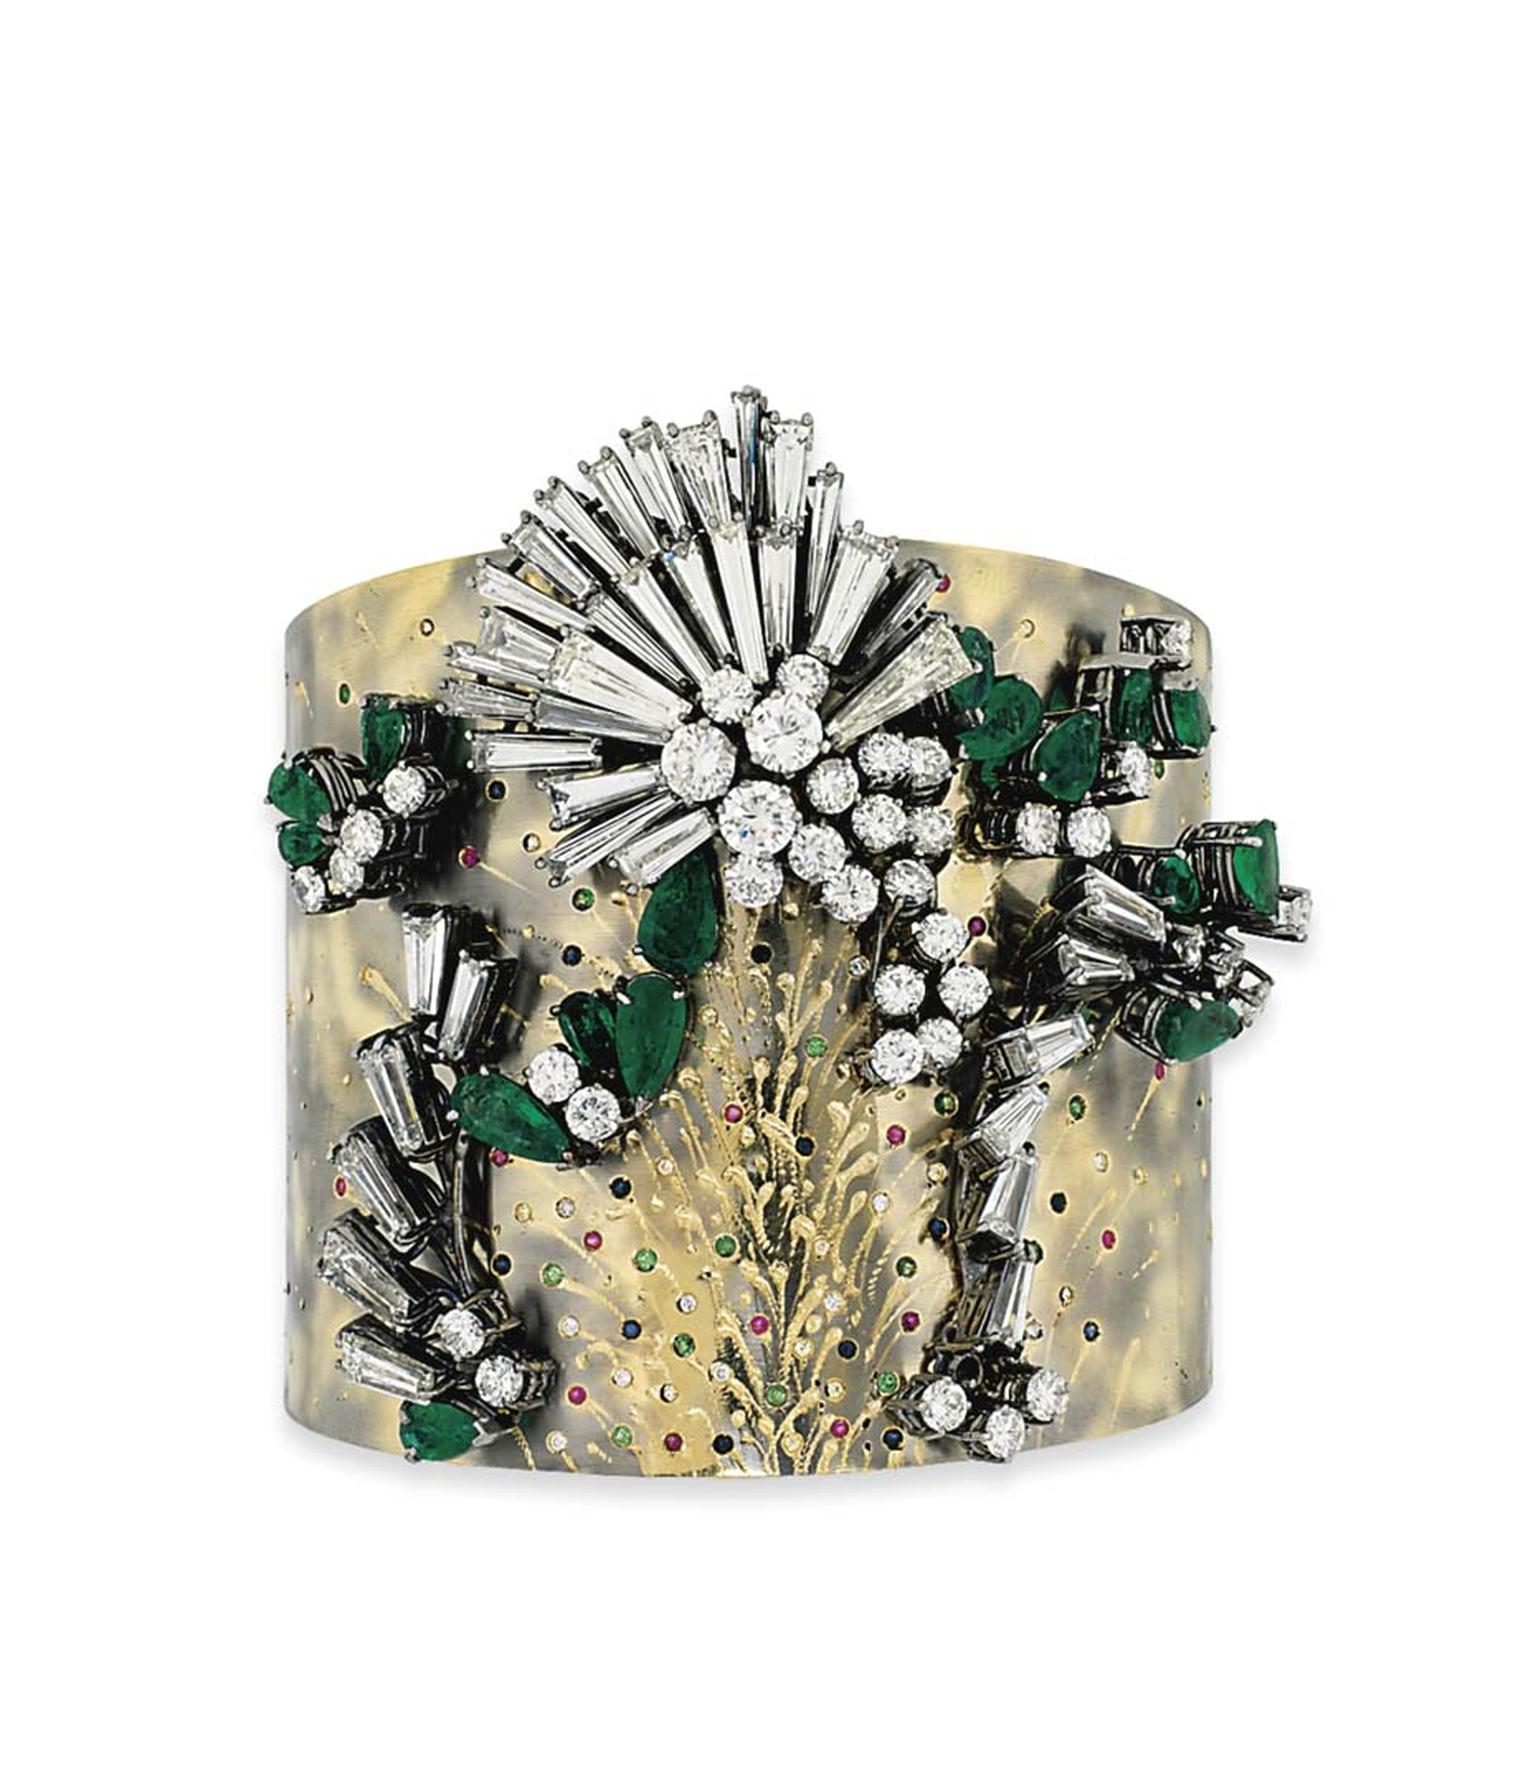 Lot 99, a contemporary cuff by Spanish artist jeweller Vicente Gracia from Valencia, is one to watch (estimate: £18,000-25,000). Christie's Important Jewels Sale on 26 November at King Street in London.